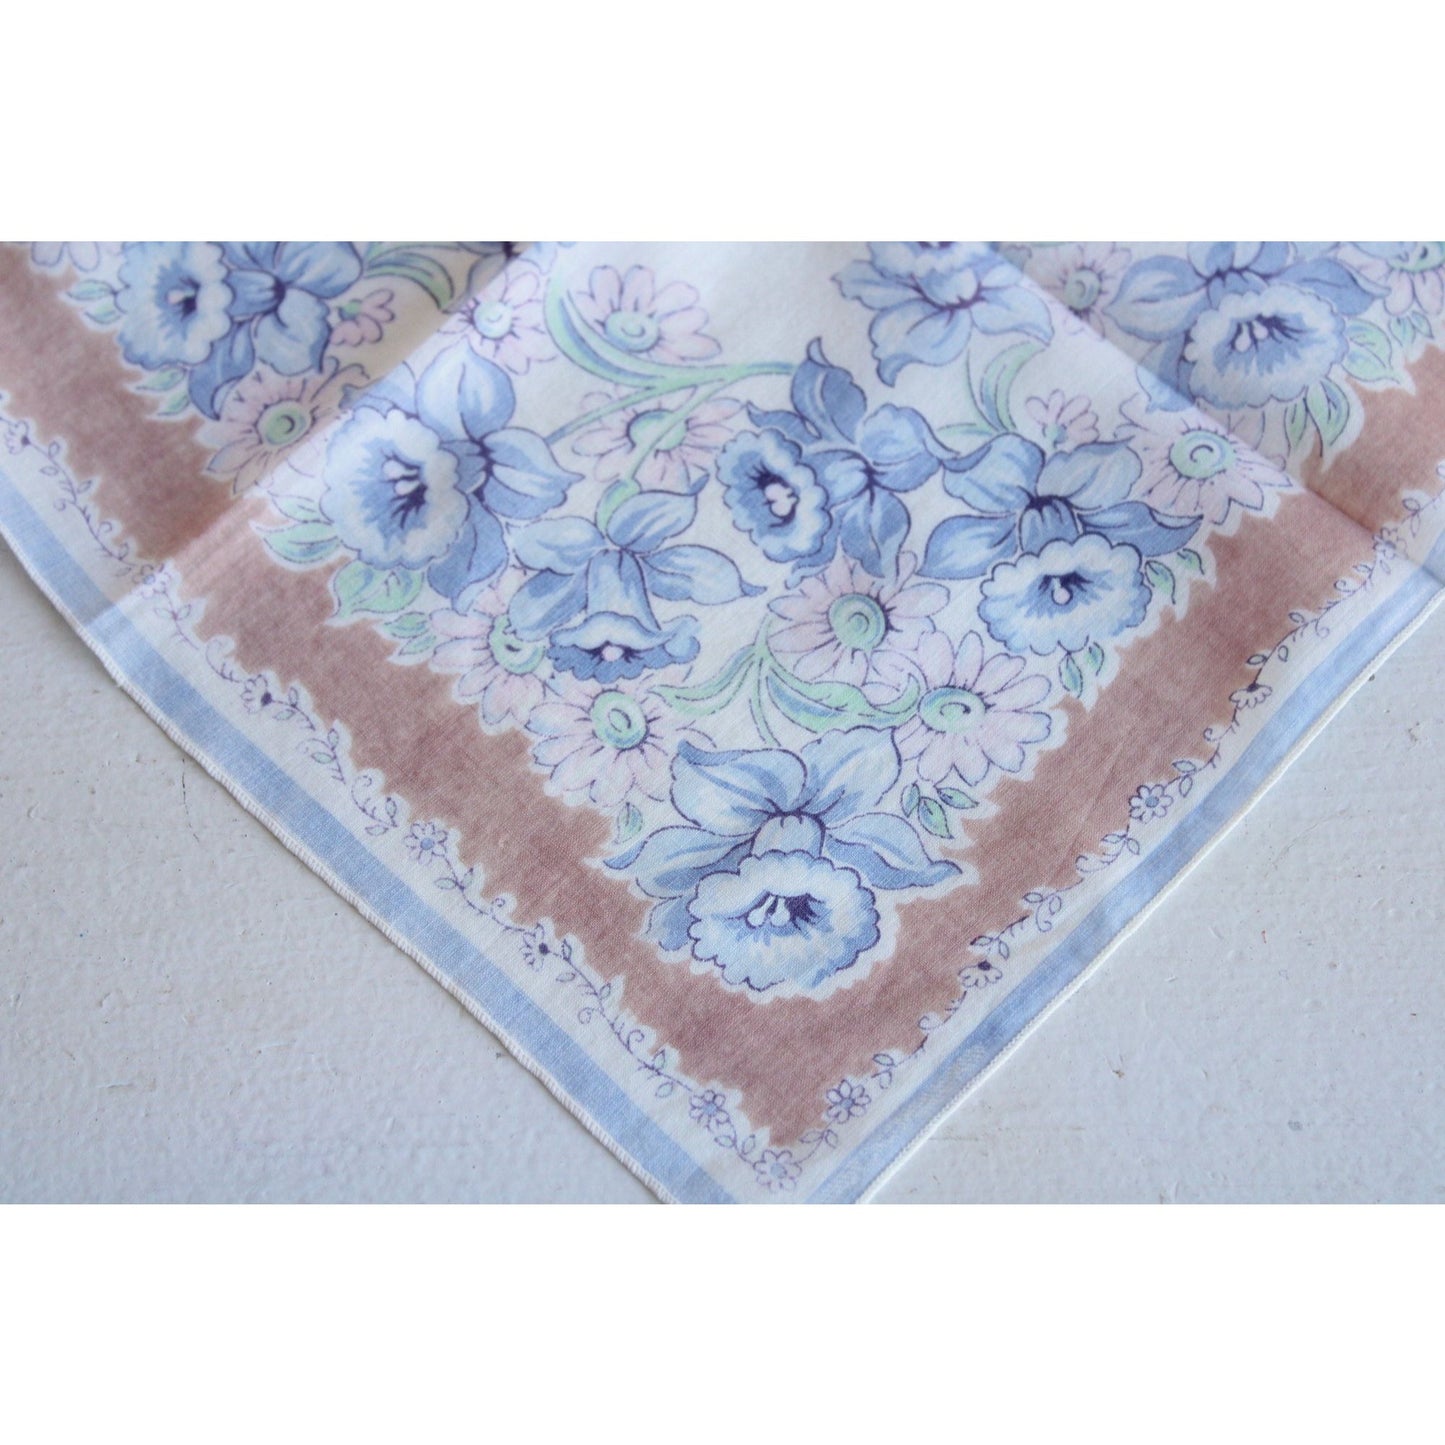 Vintage Blue and Brown Flower Print Cotton Hanky